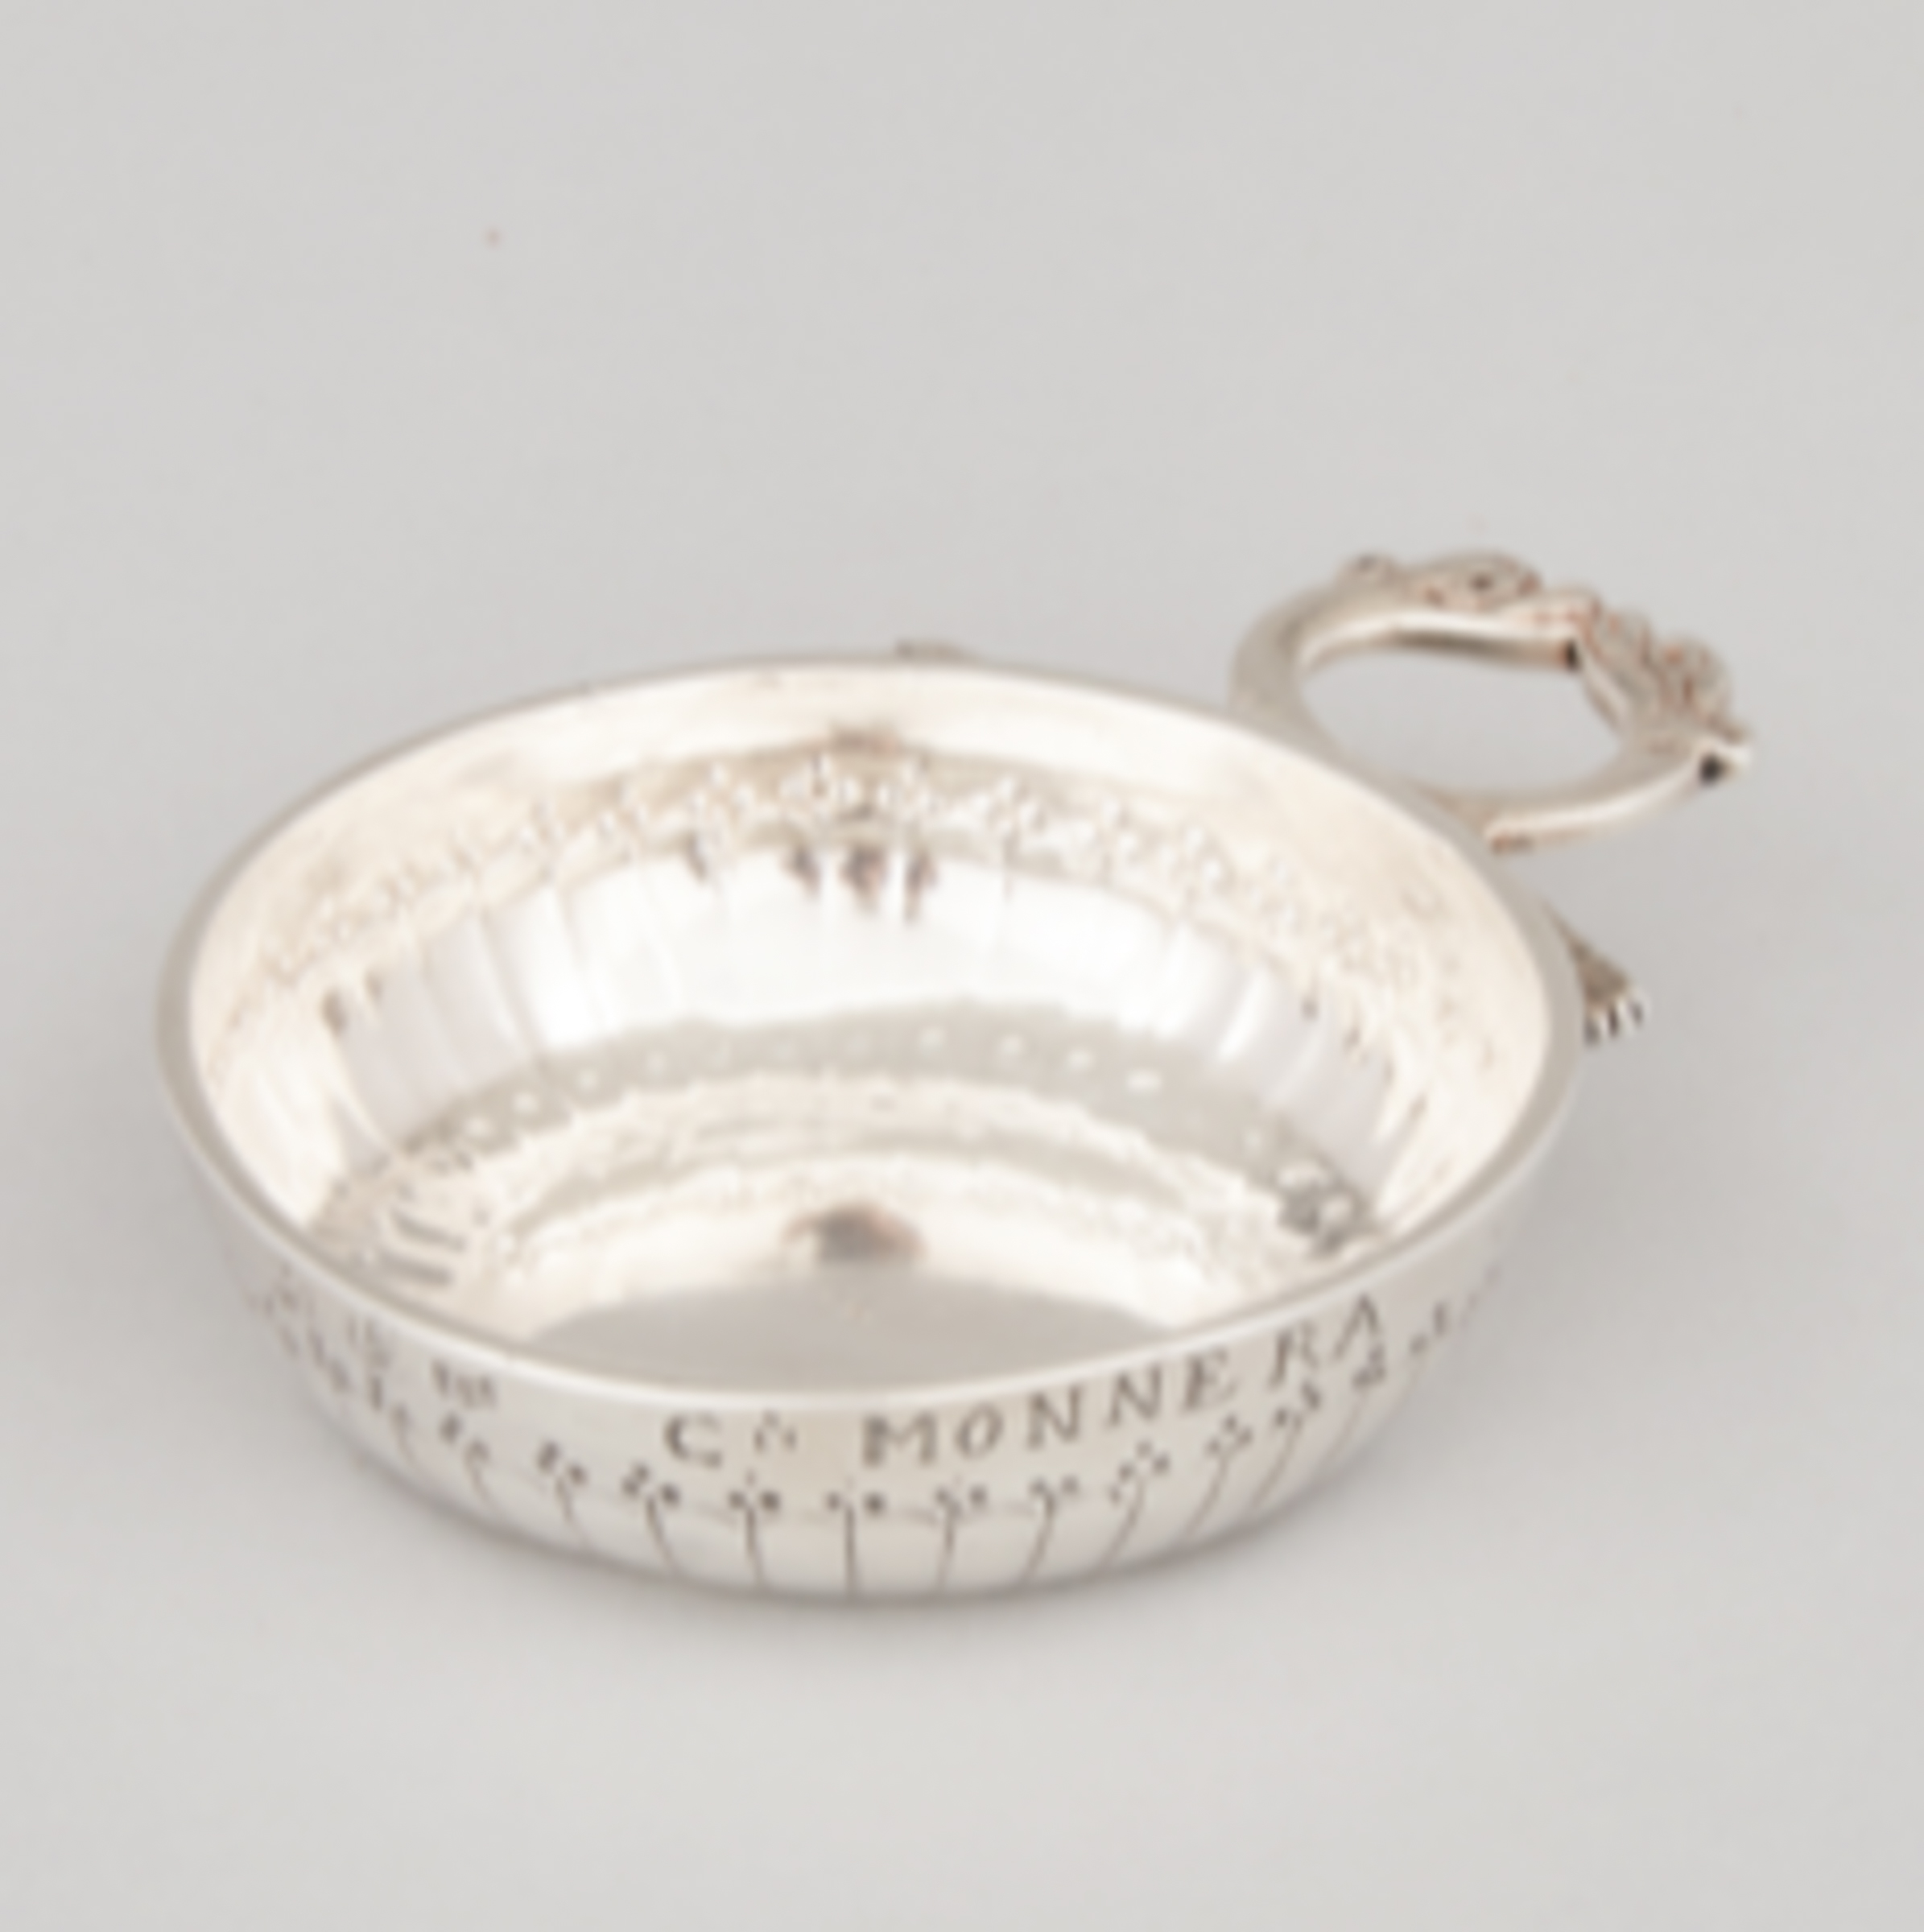 French Provincial Silver Wine Taster, probably Caen, second half of the 18th century 